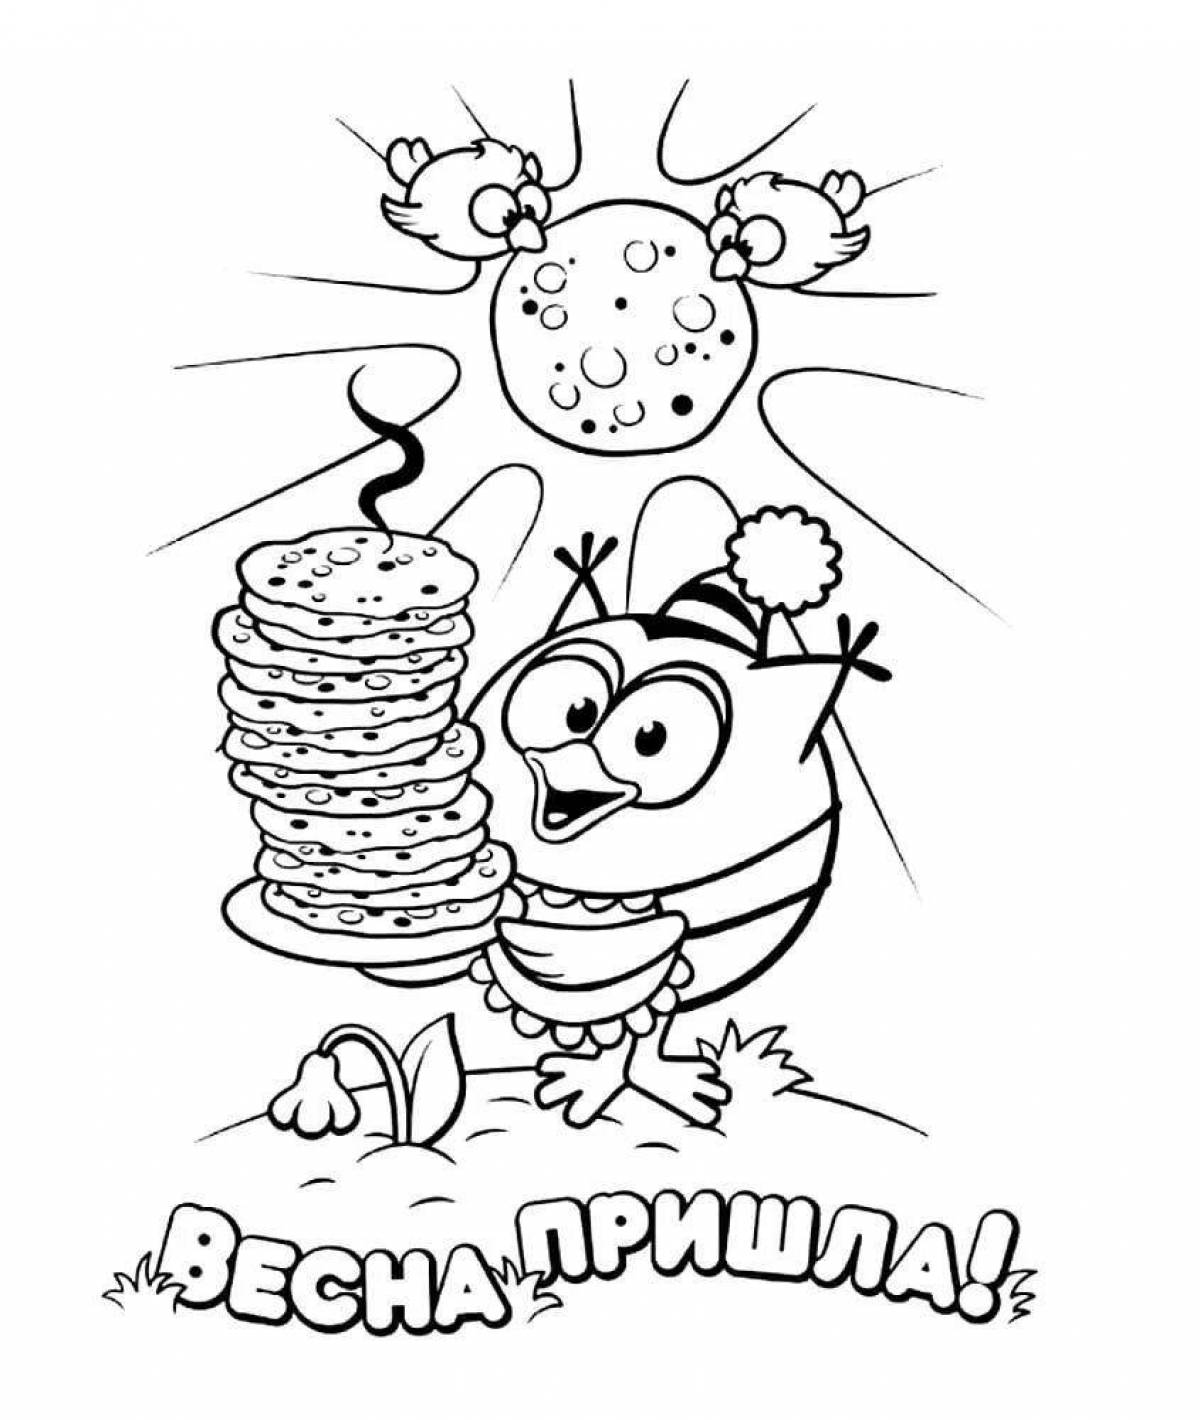 Coloring page nutritious pancakes for carnival